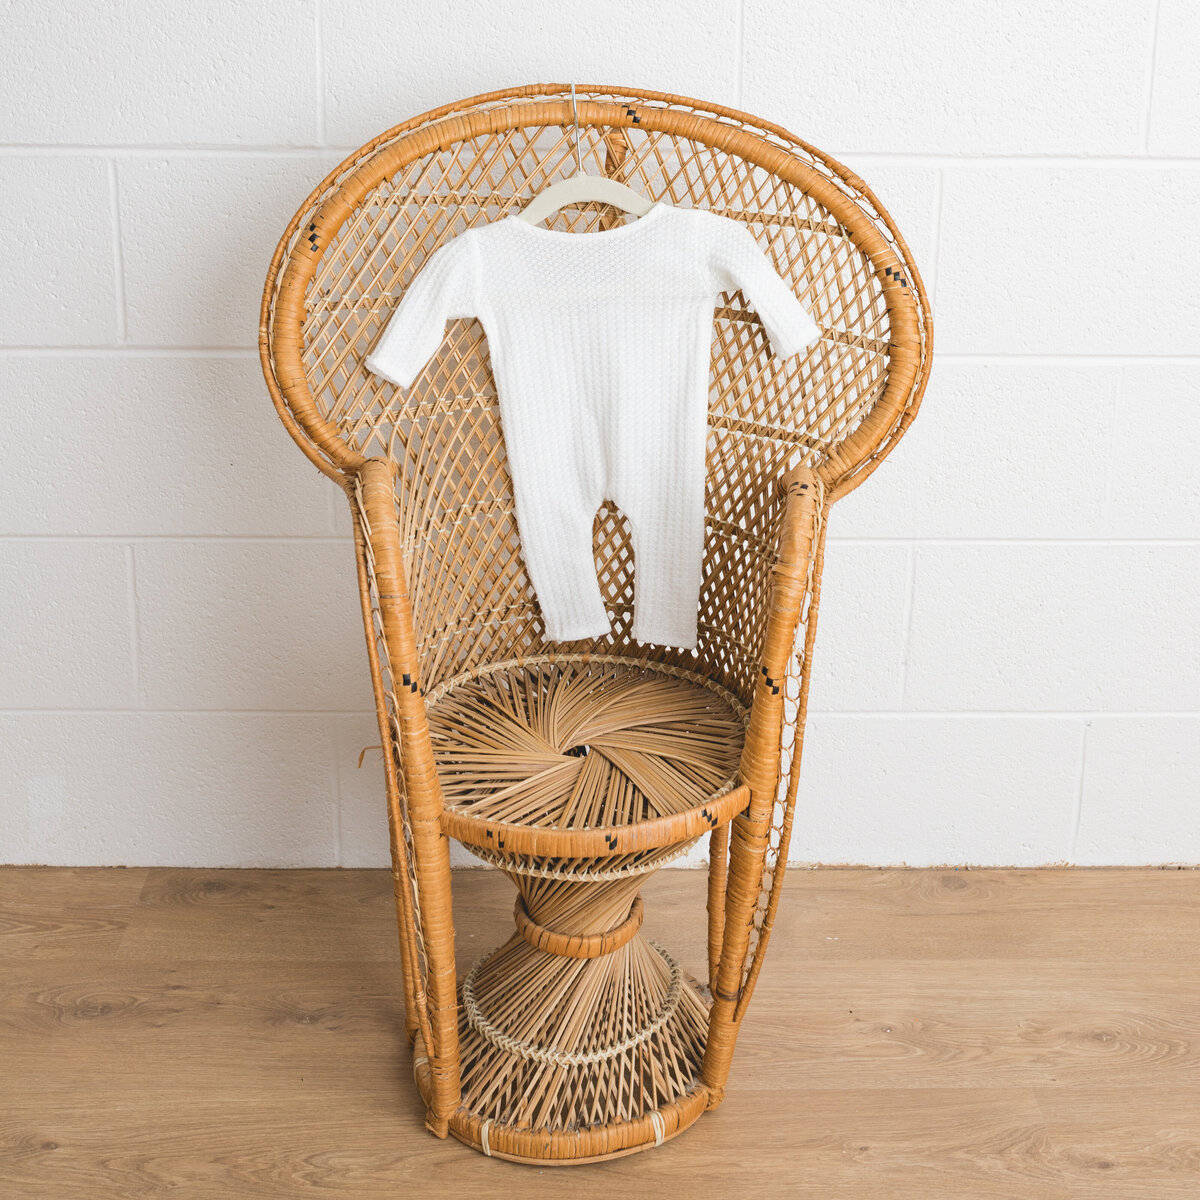 Image depicts a miniature peacock chair in a photography studio on the chair hangs a tiny newborn outfit in white knit  with  a waffle weave.  This image is a sample of Lauren Vanier Photography's newborn client wardrobe. Image taken in Hobart Tasmania